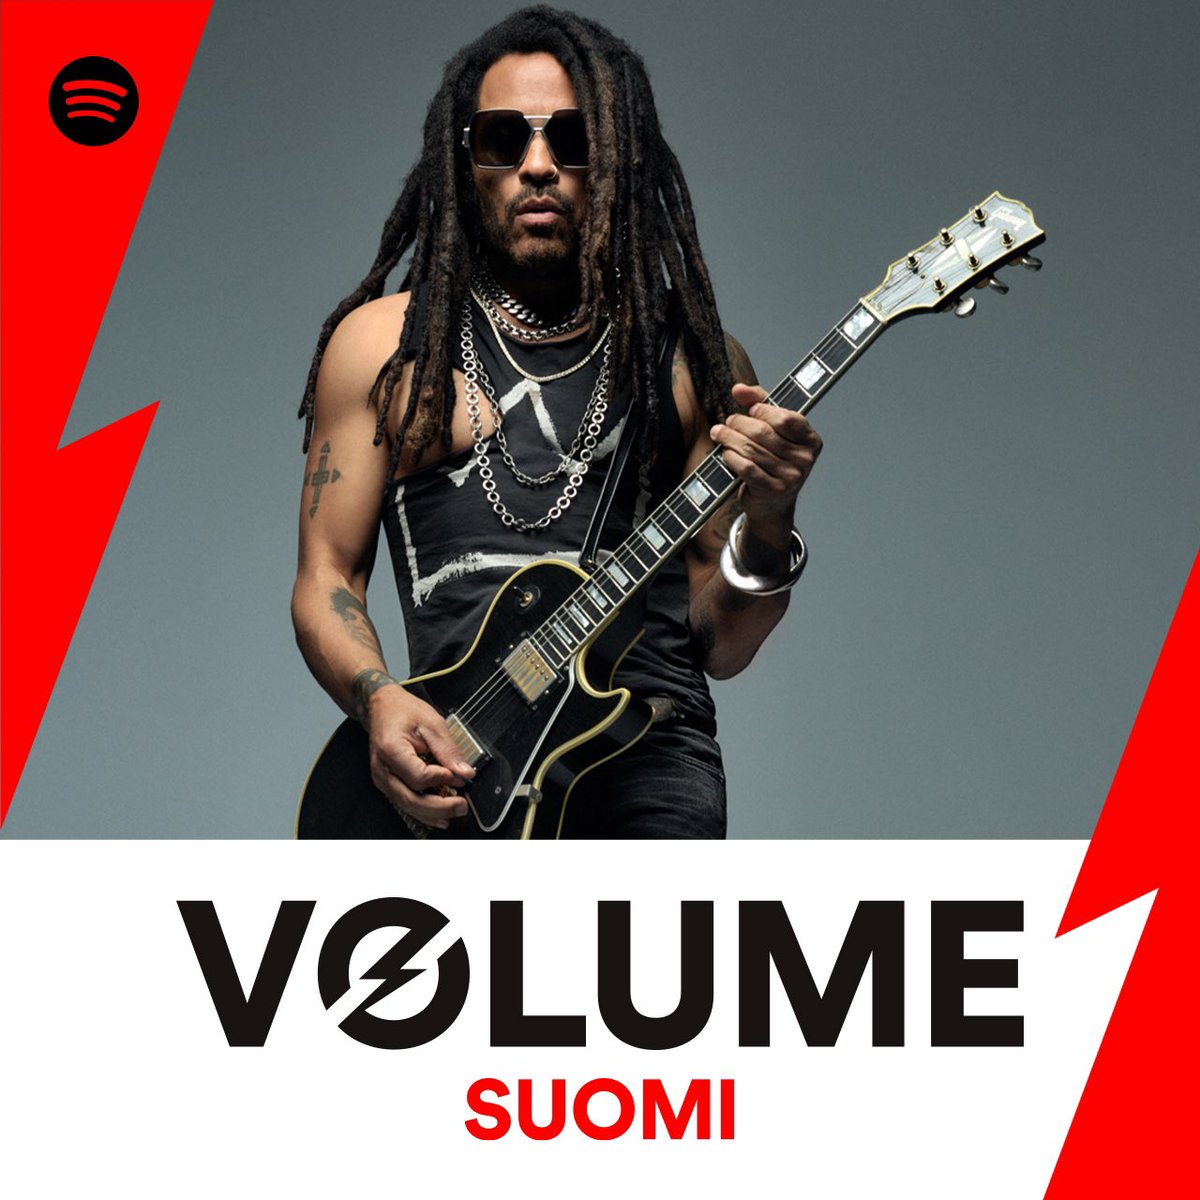 Thanks @Spotify for the “Human” add on the ‘VOLUME SUOMI’ playlist. open.spotify.com/user/spotify/p…